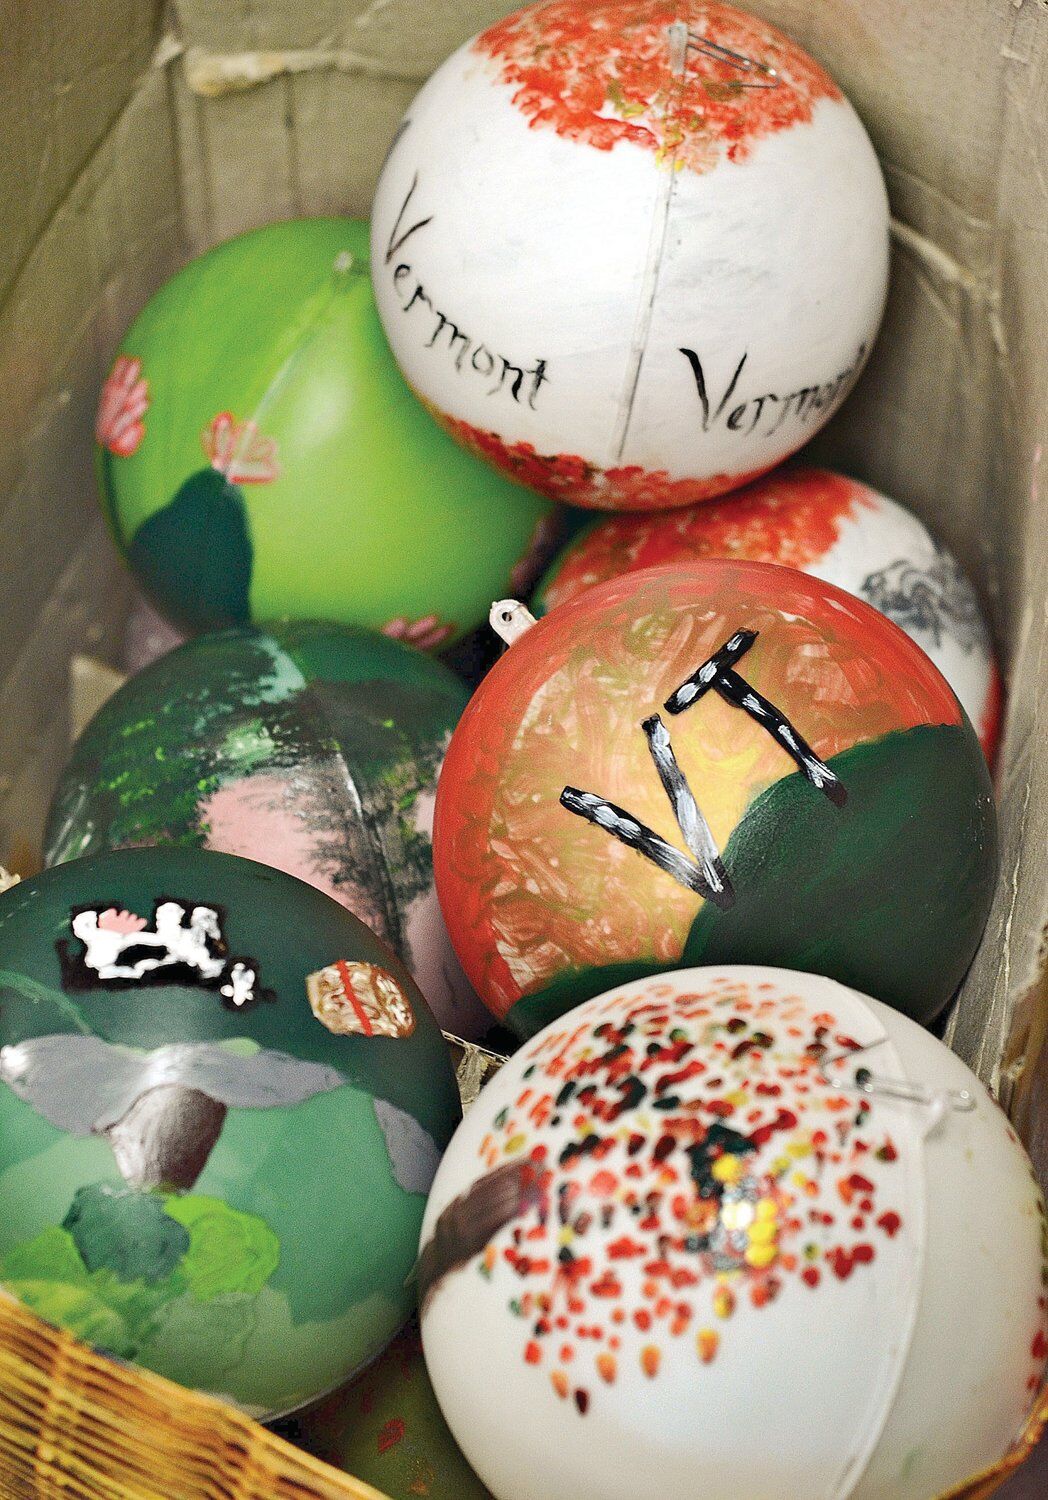 Vermont students paint ornaments for National Christmas Tree